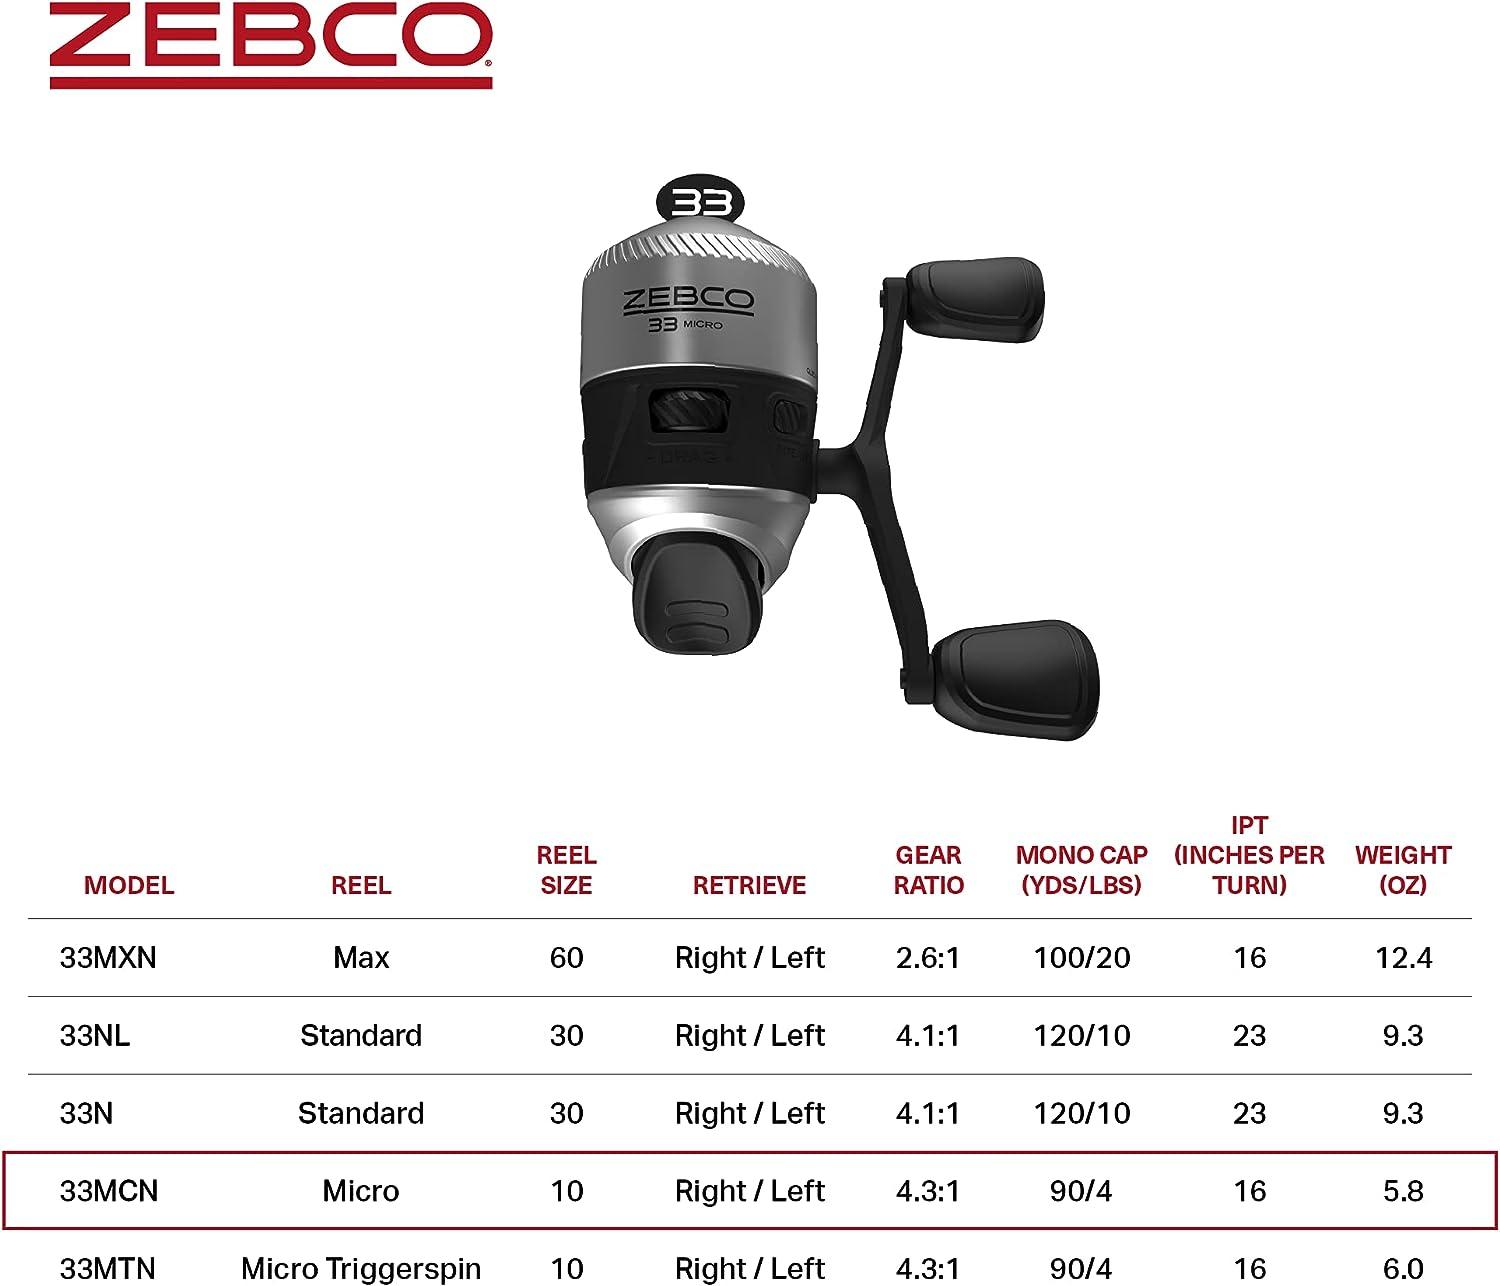 Zebco 33 Micro Spincast Fishing Reel, Size 10 Reel, Changeable Right- or  Left-Hand Retrieve, Built-in Bite Alert, Pre-spooled with 4 lb Zebco Cajun  Line, Silver/Black Plastic Clam Packaging